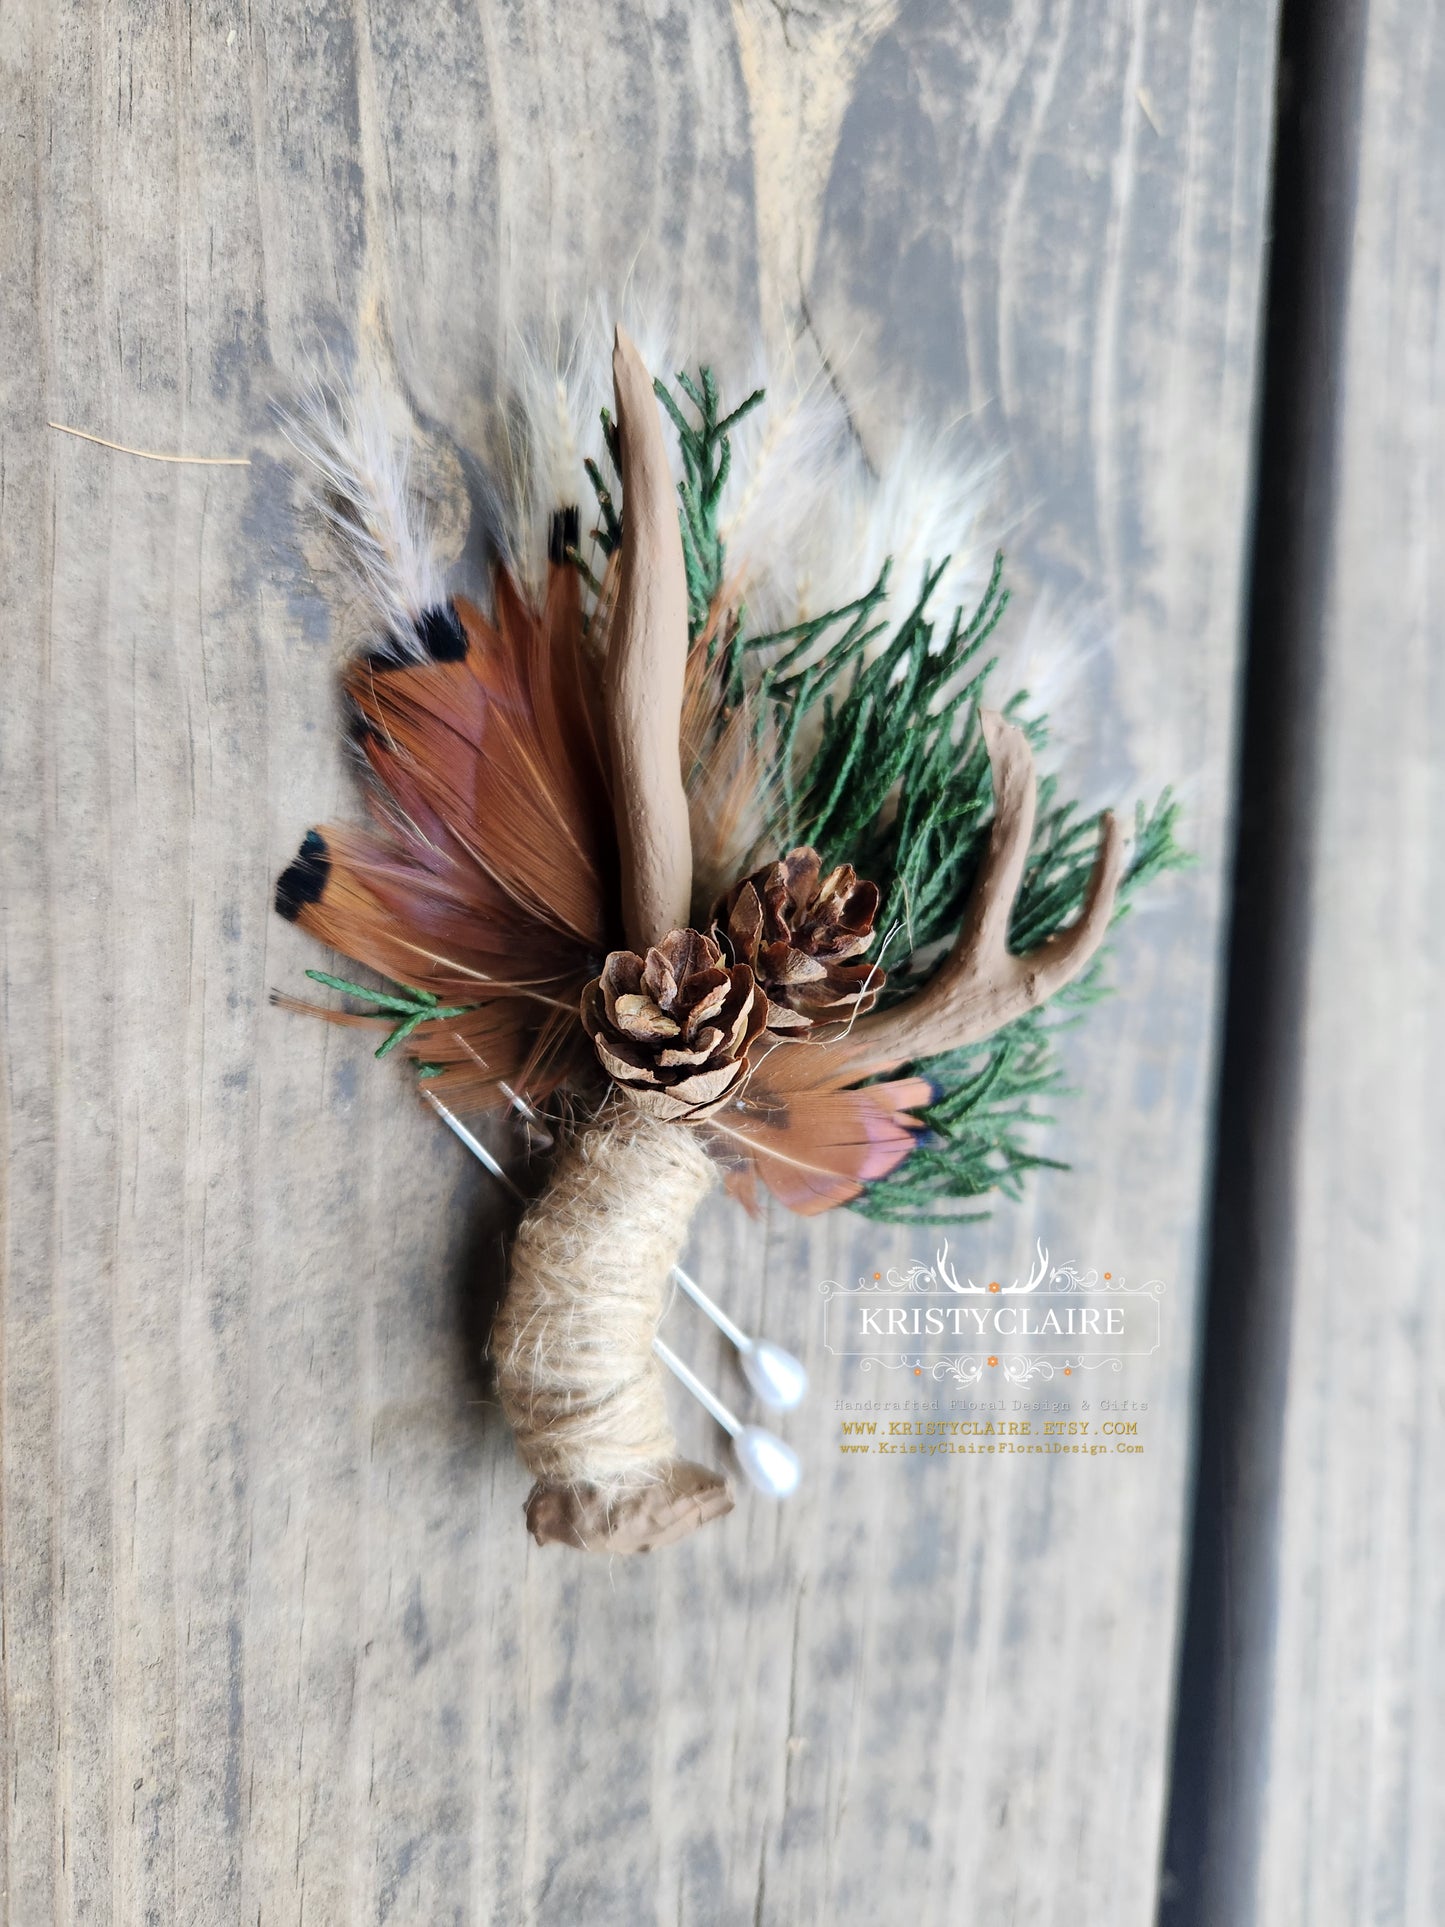 Beige Antler Boutonniere with Preserved Cedar, Pampas Grass, Pheasant Feathers & PineCones, Buttonhole, Lapel, Twine, Faux, Resin, Taxidermy